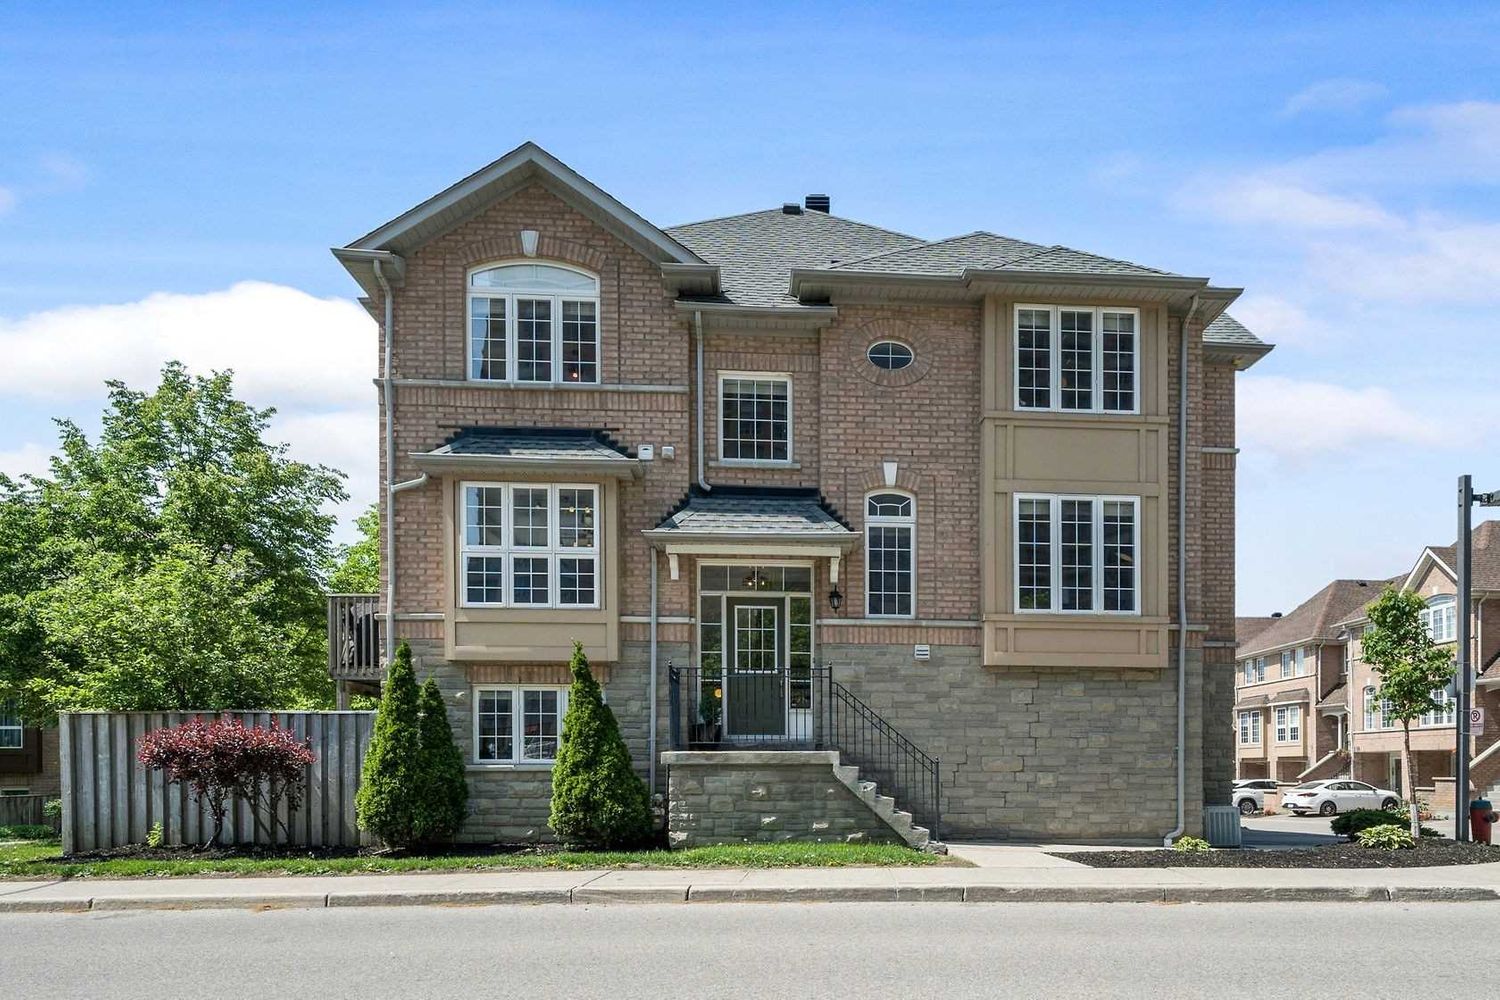 50 Strathaven Drive. 50 Strathaven Dr Townhomes is located in  Mississauga, Toronto - image #3 of 3